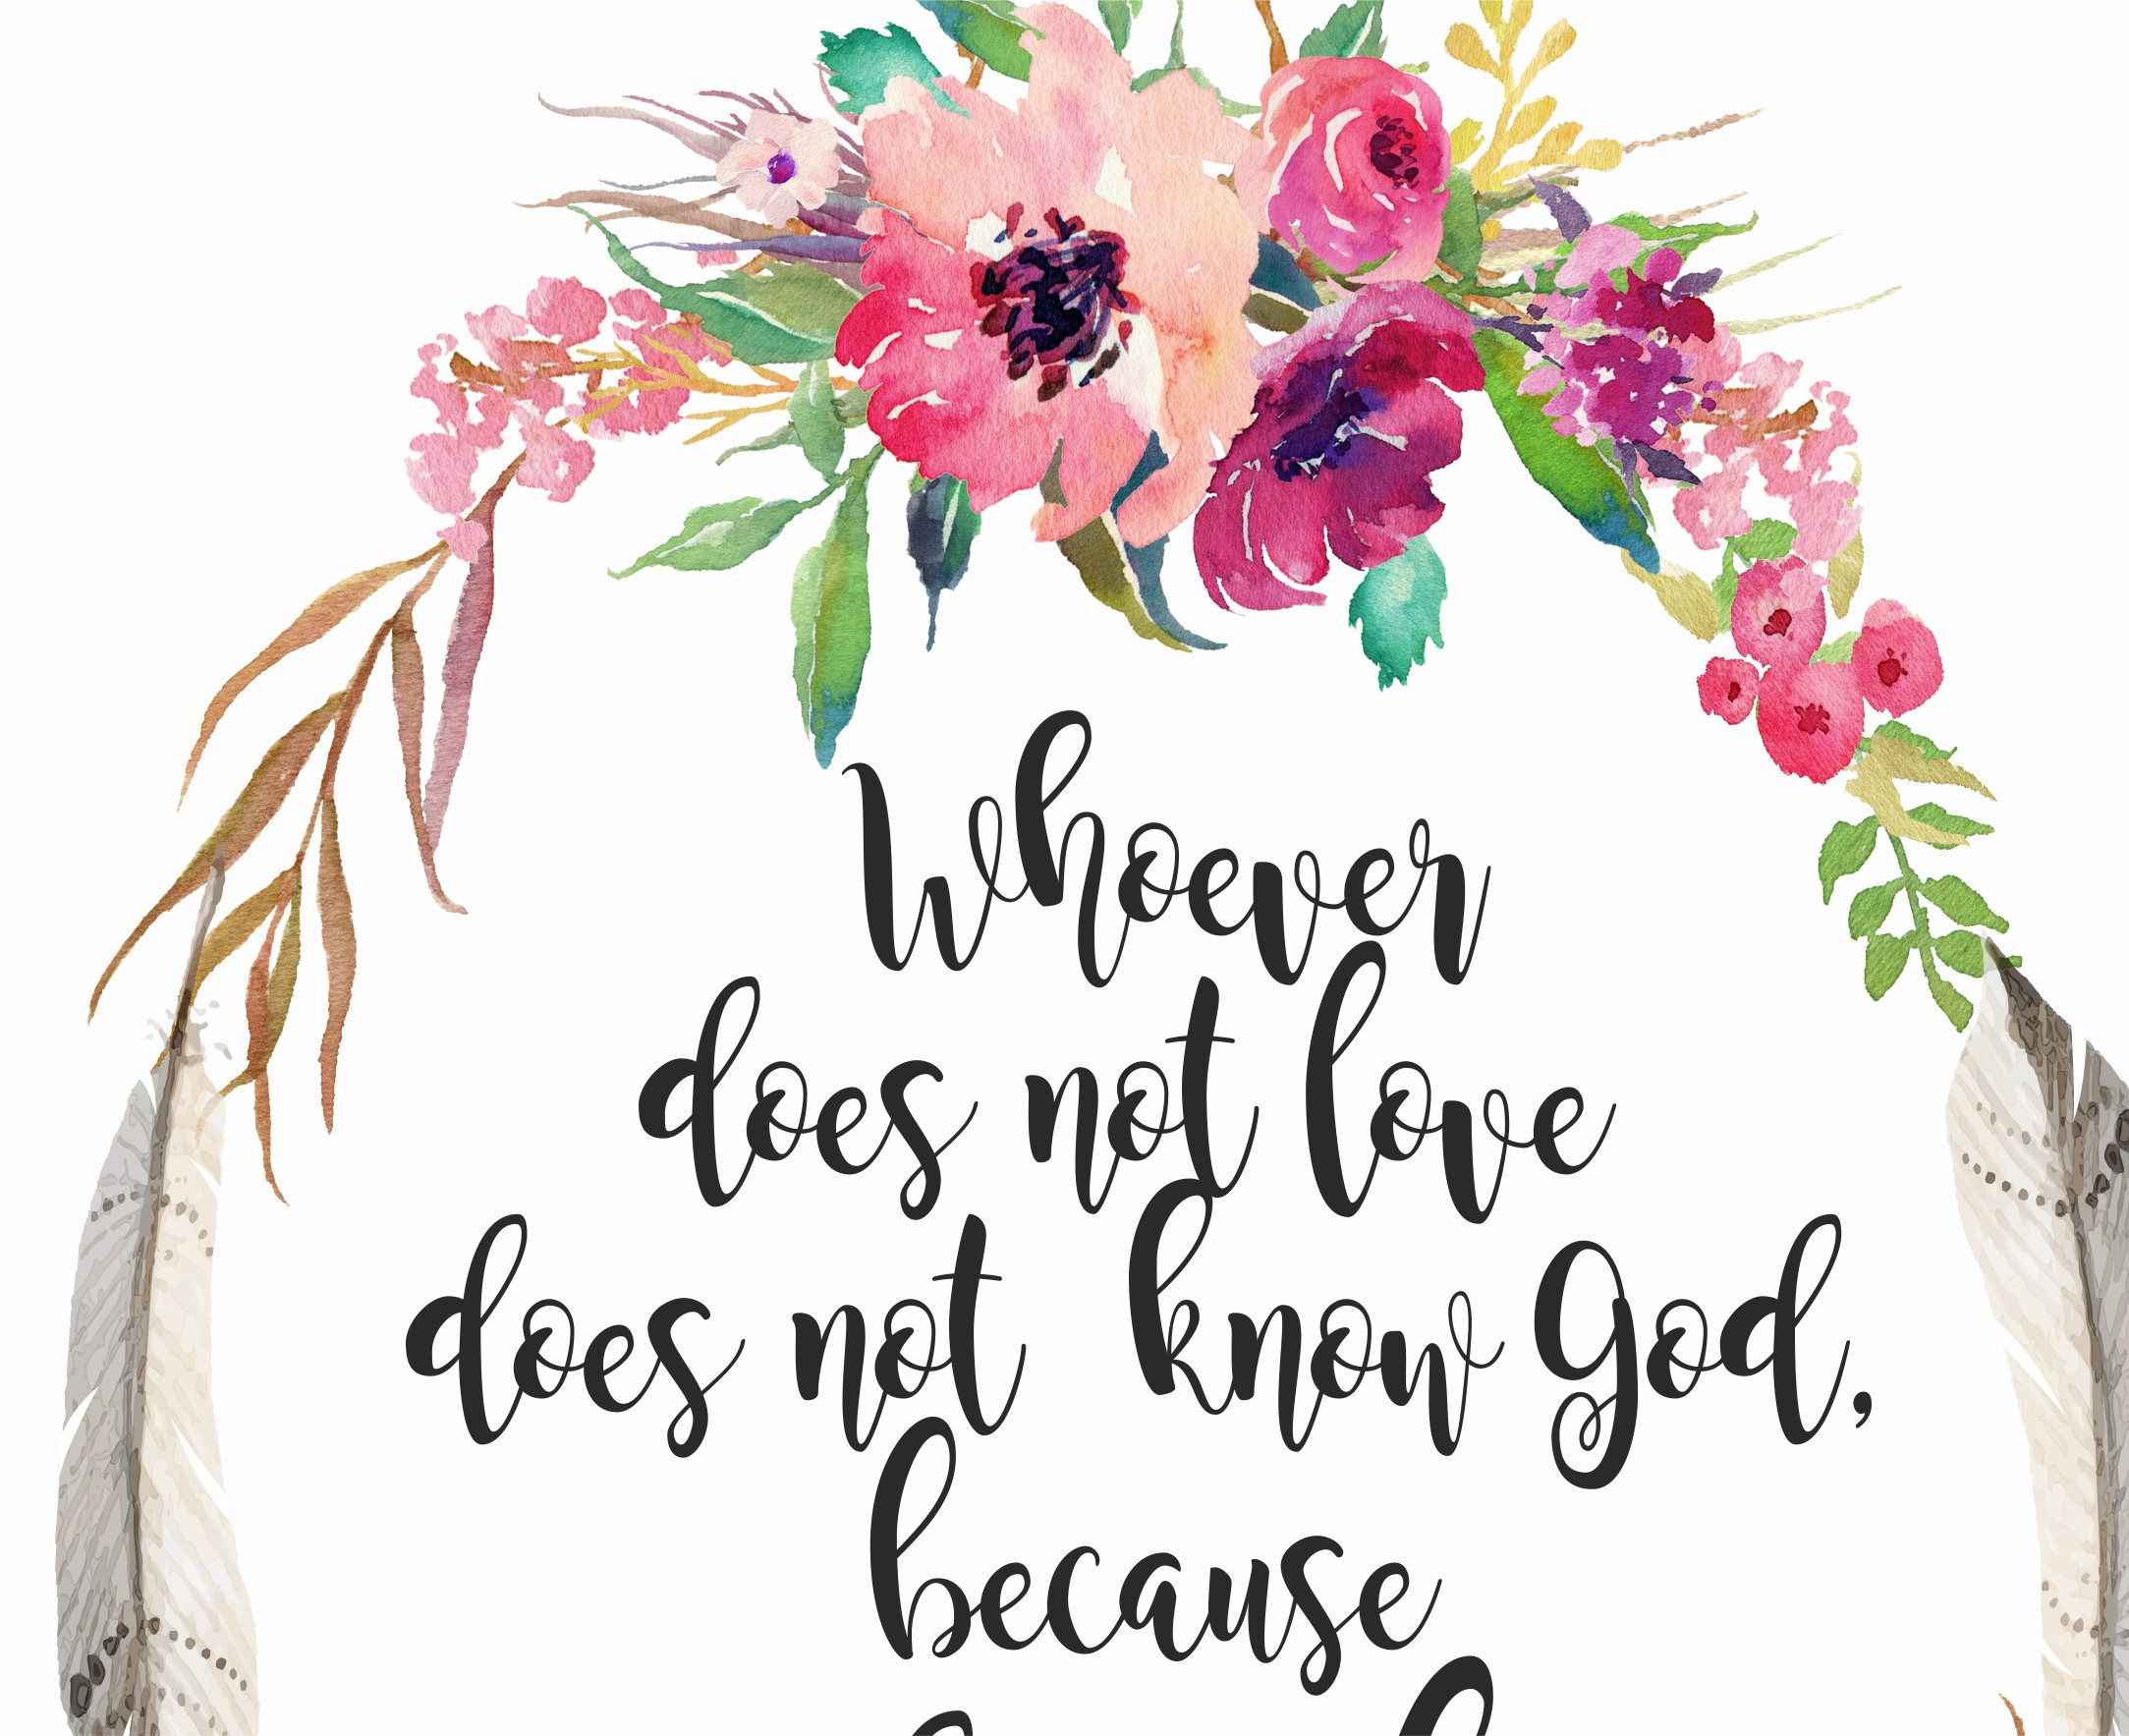 bible-verse-1-john-4-8-god-is-love-printable-bible-quotes-etsy